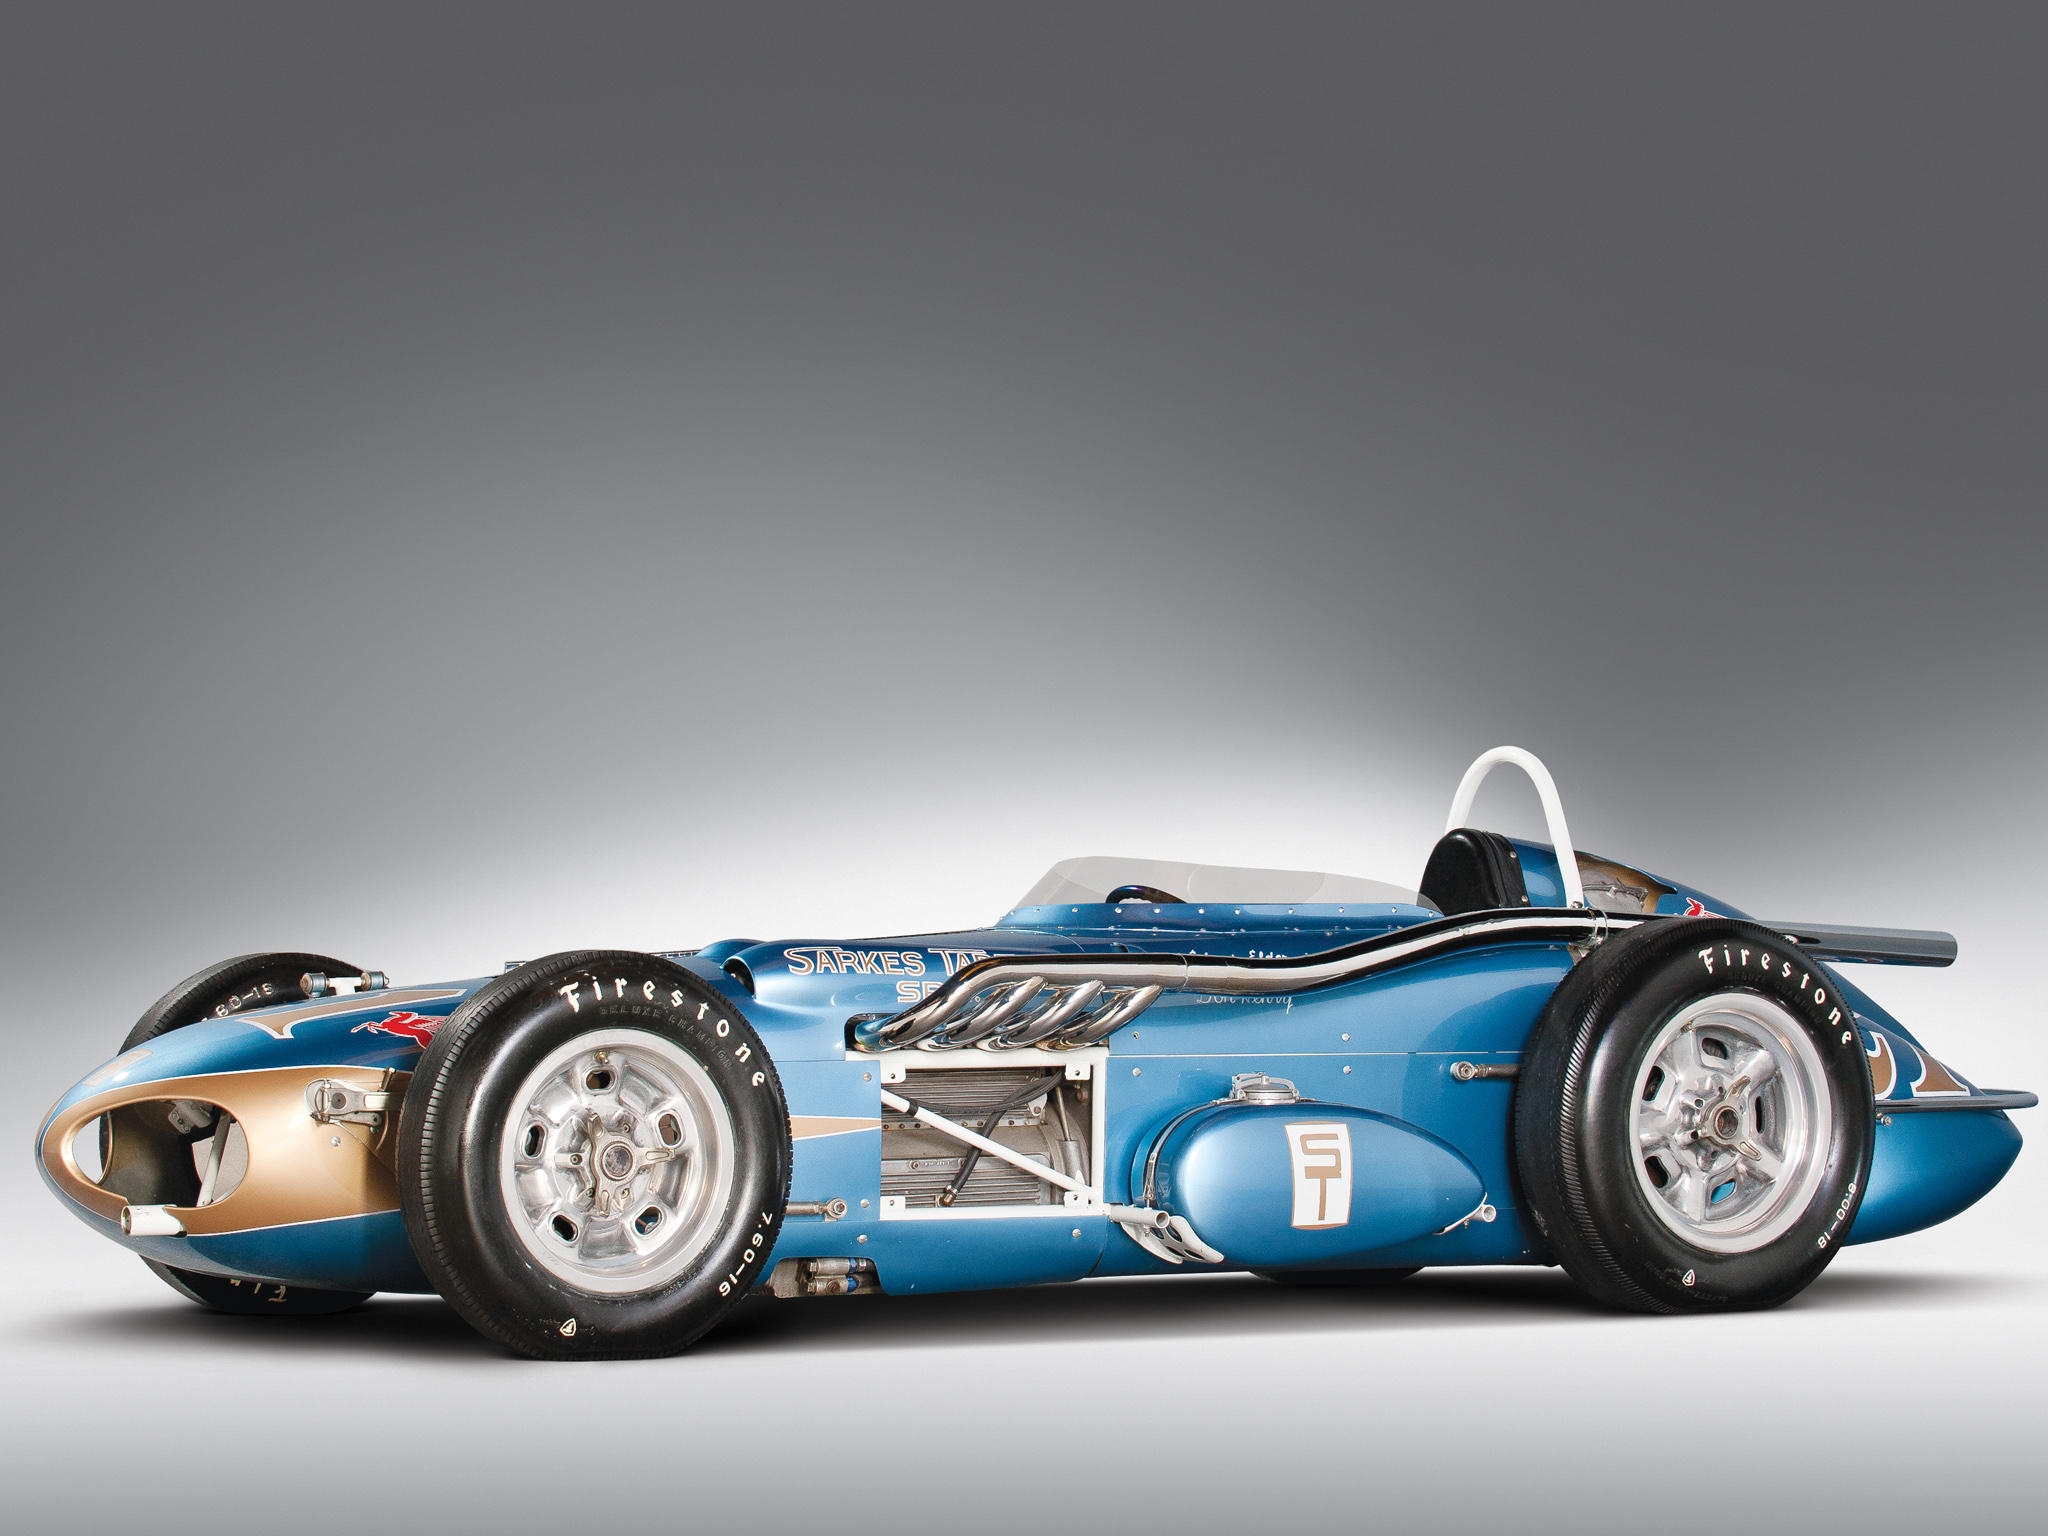 1962, Lesovsky, Indianapolis, Roadster, Indy, 500, Race, Racing, Classic, Wheel Wallpaper